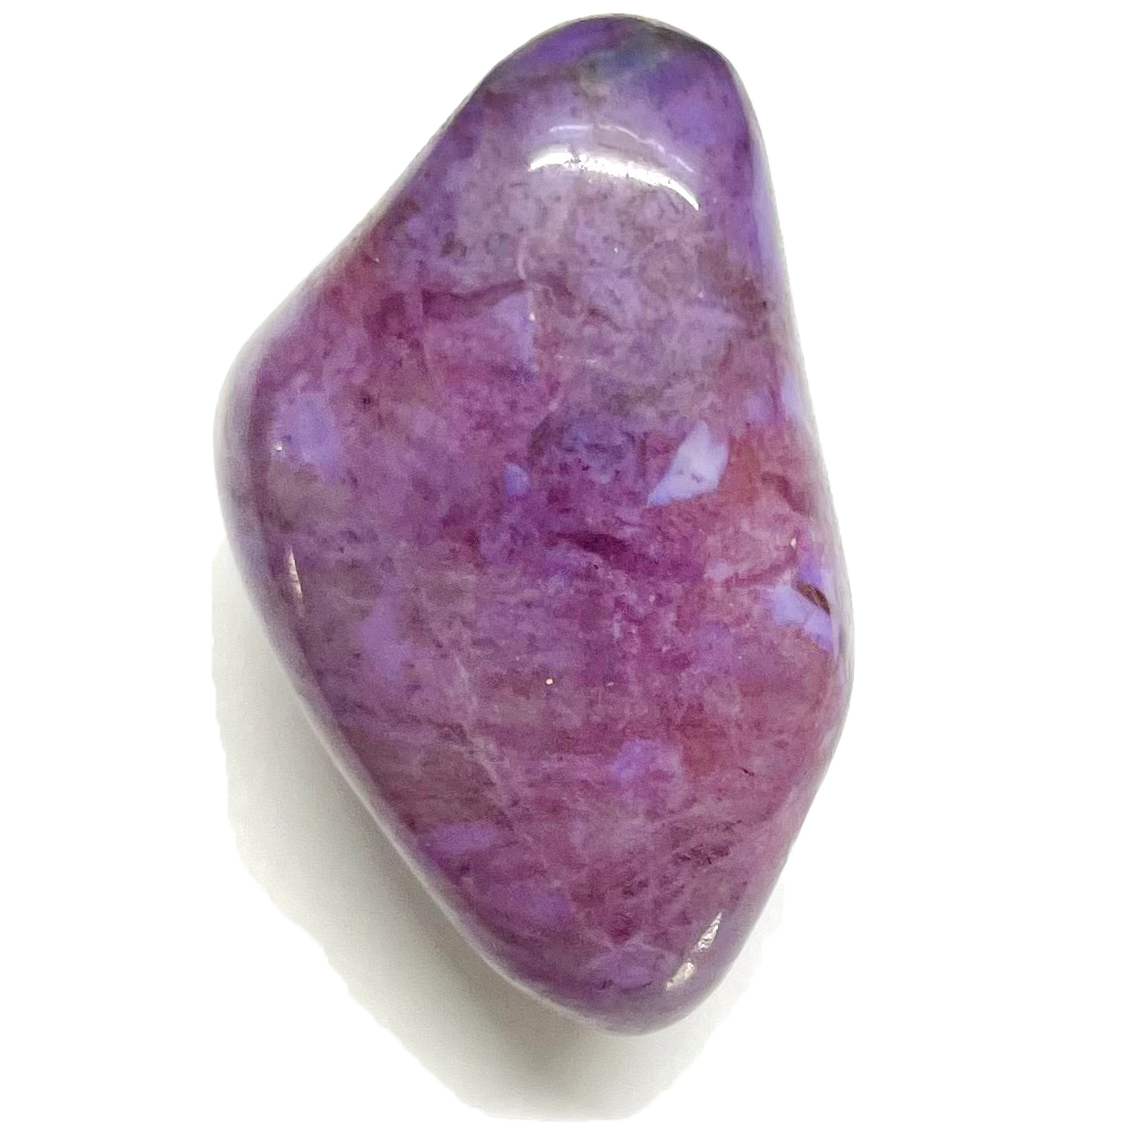 A tumble polished piece of purple turkieyenite jade.  The stone is purple with red, black, and white marbling.